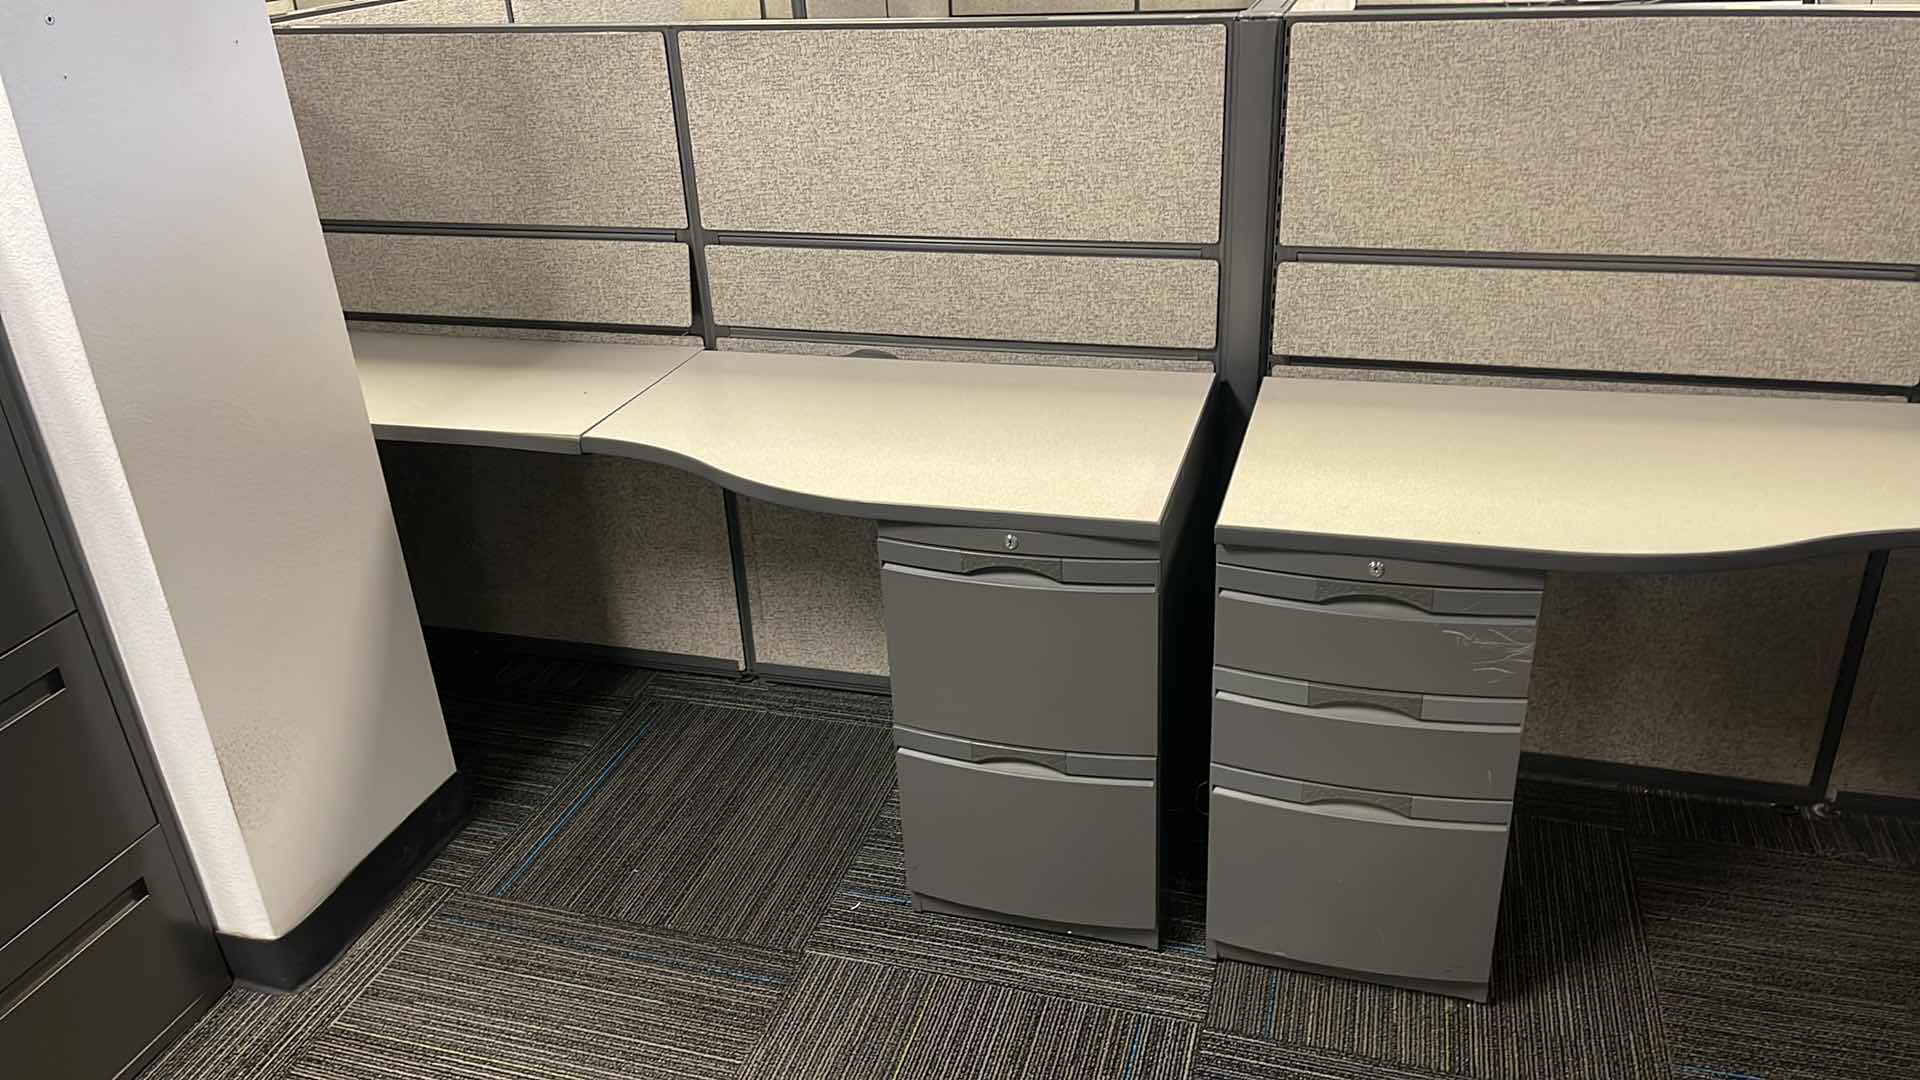 Photo 4 of 3 PC CUBICLE SET W 5 DRAWER MEDAL BASE DESKS 2 CUBICLES 76” X 76” H50” 1 CUBICLE 12’ X 76” H50”(BUYER TO DISASSEMBLE & REMOVE FROM 2ND STORY OFFICE BUILDING W ELEVATOR)